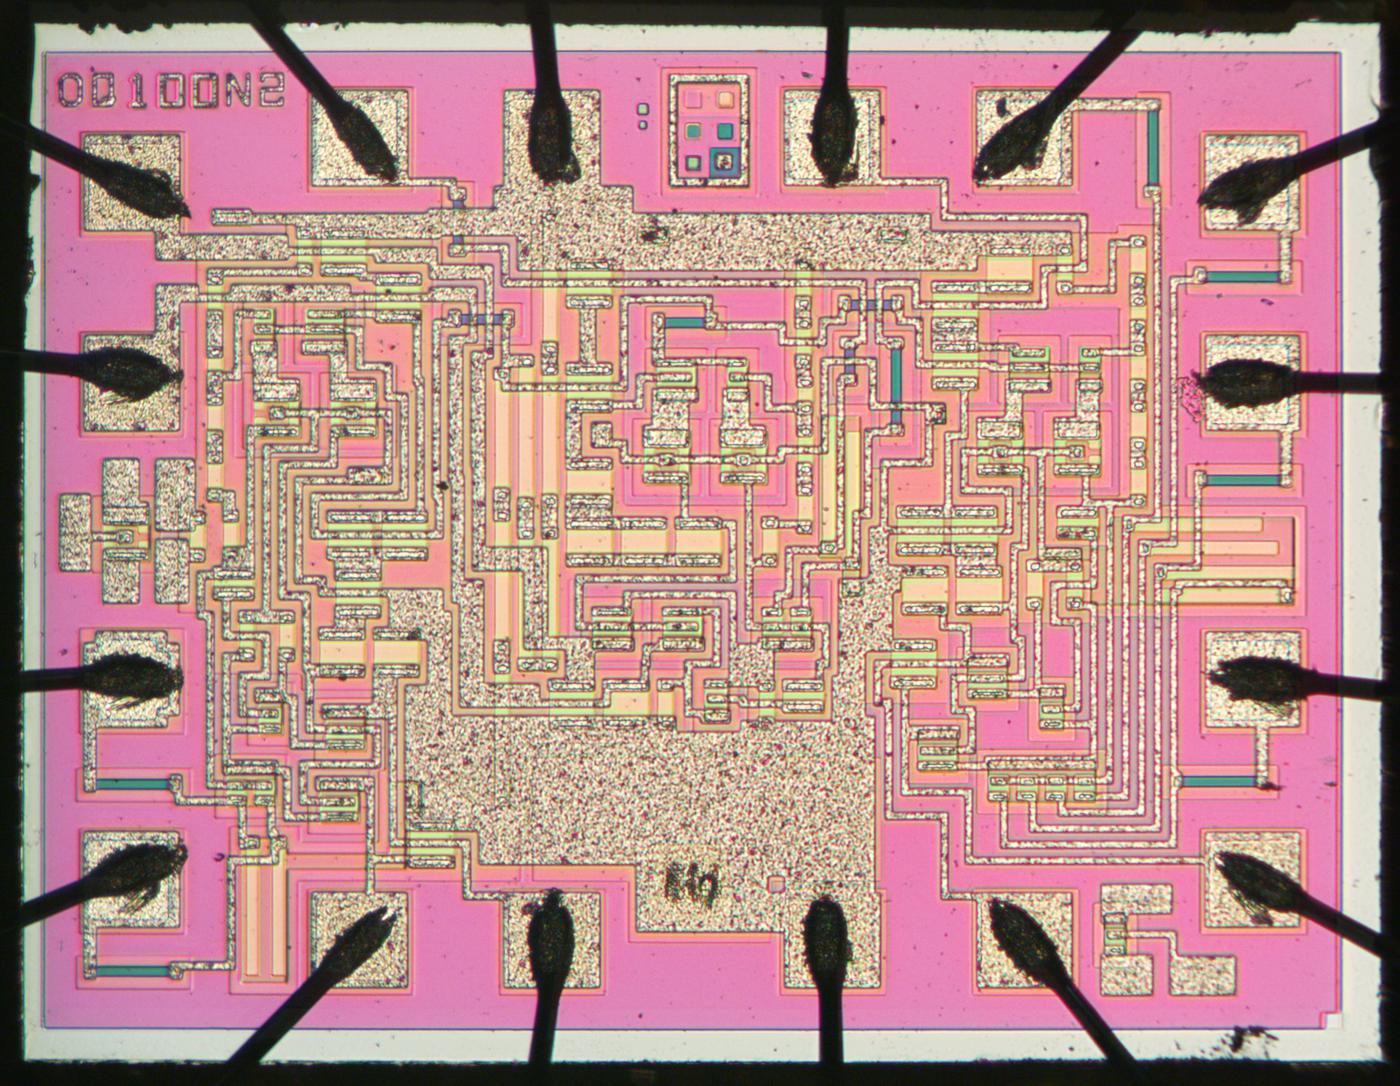 Die photo of the Philips QC100 chip. Click this photo (or any other) for a larger version. Photo courtesy of EvilMonkeyDesignz.